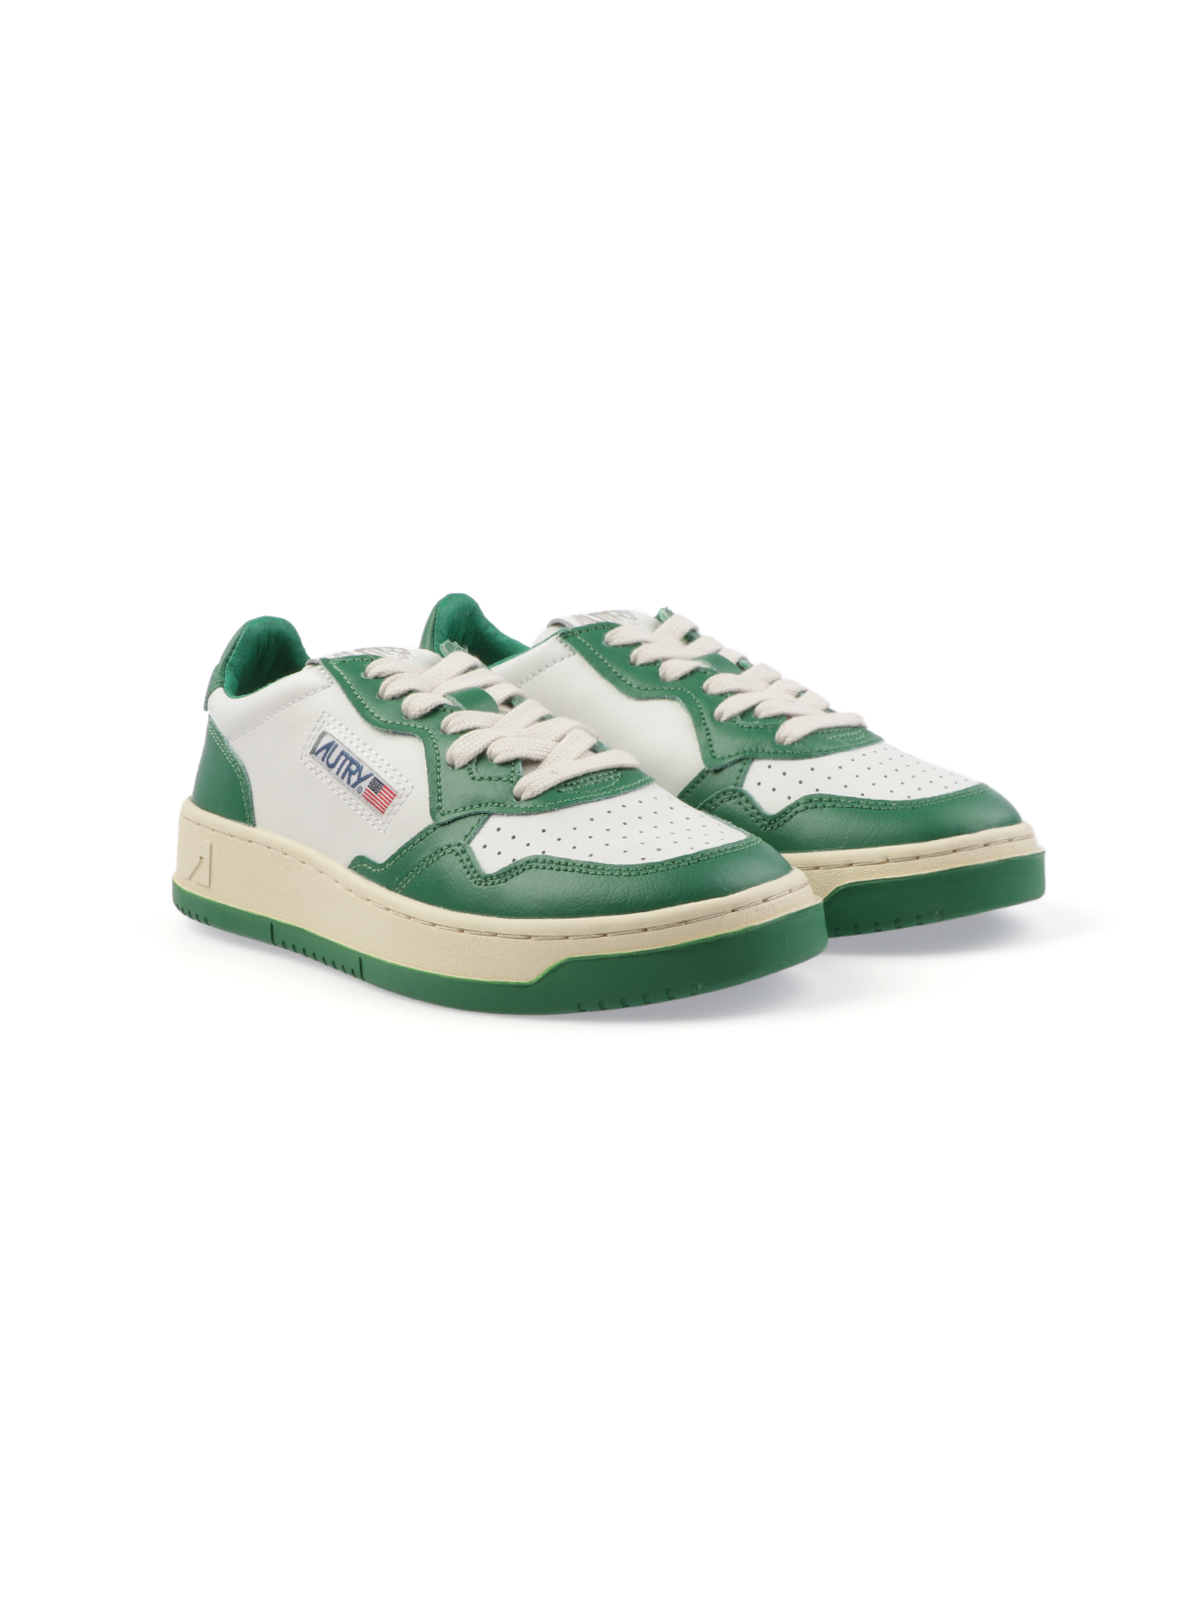 Picture of AUTRY | Women's Medalist Low Bicolor Leather Sneakers